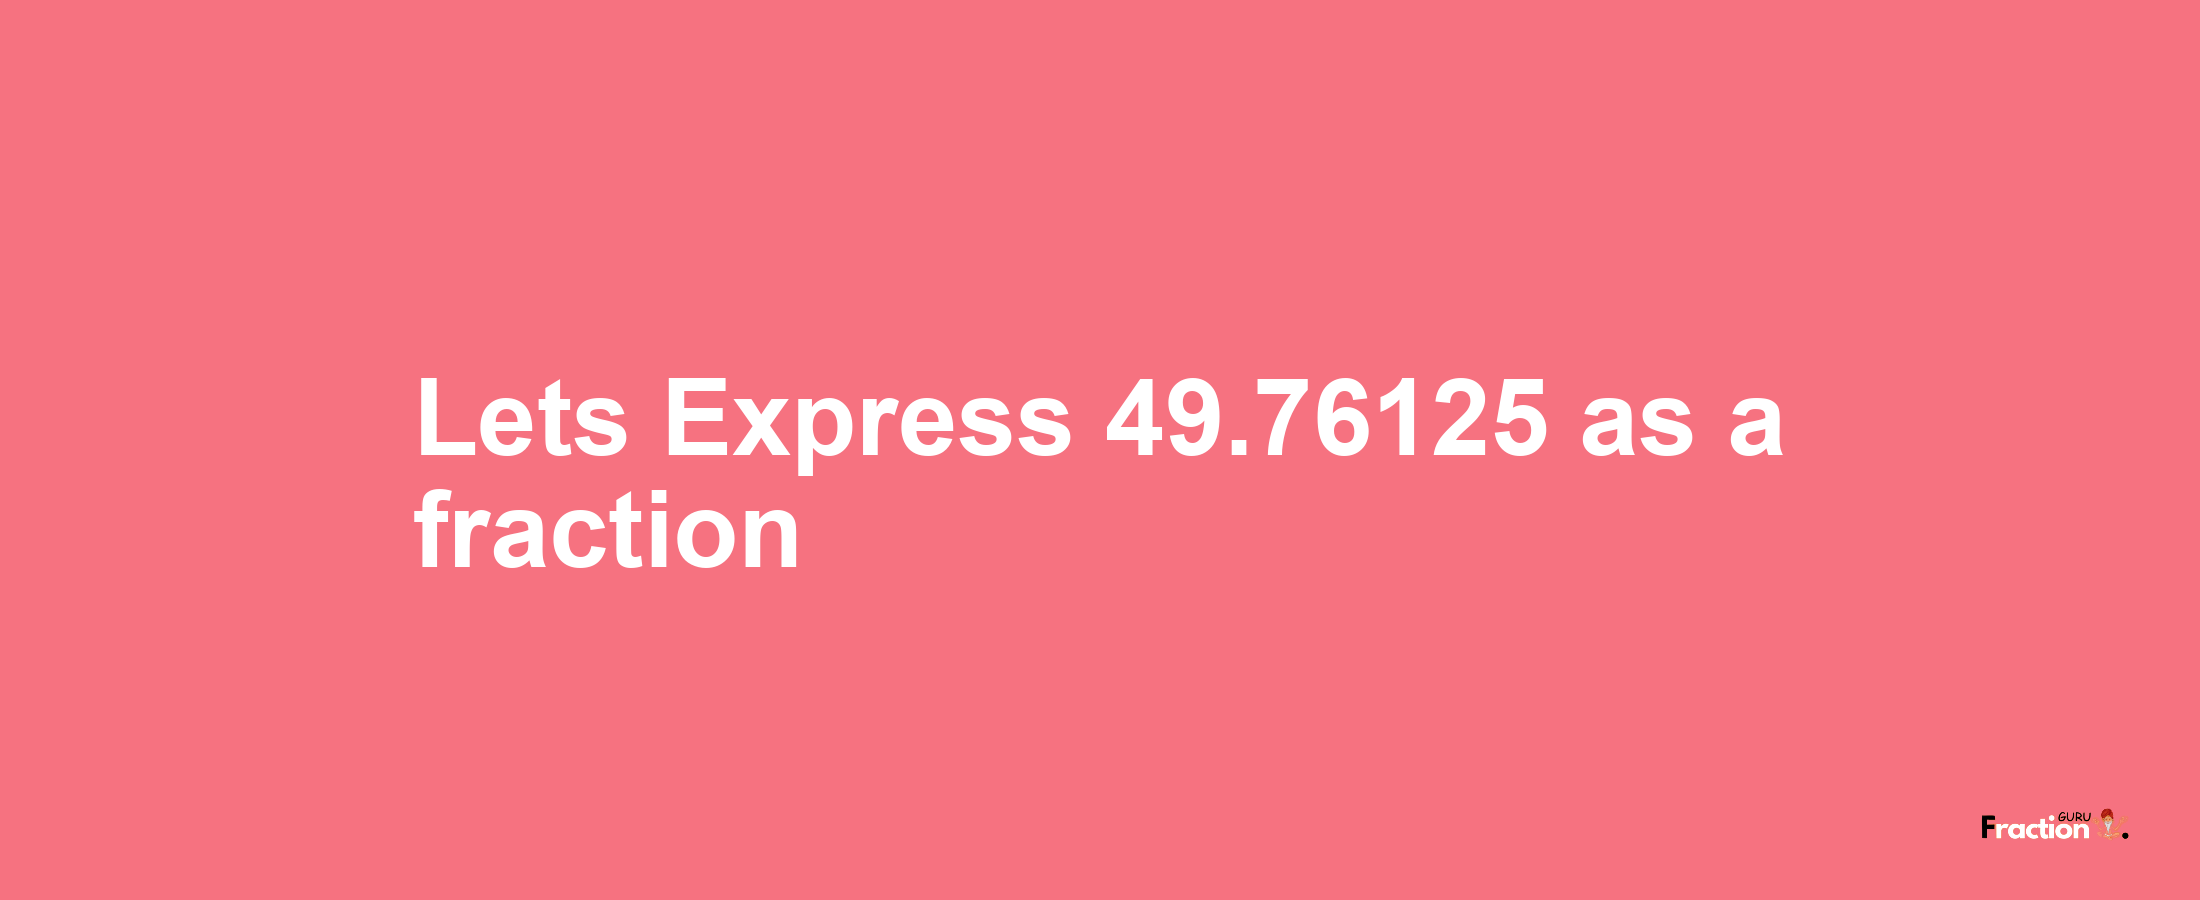 Lets Express 49.76125 as afraction